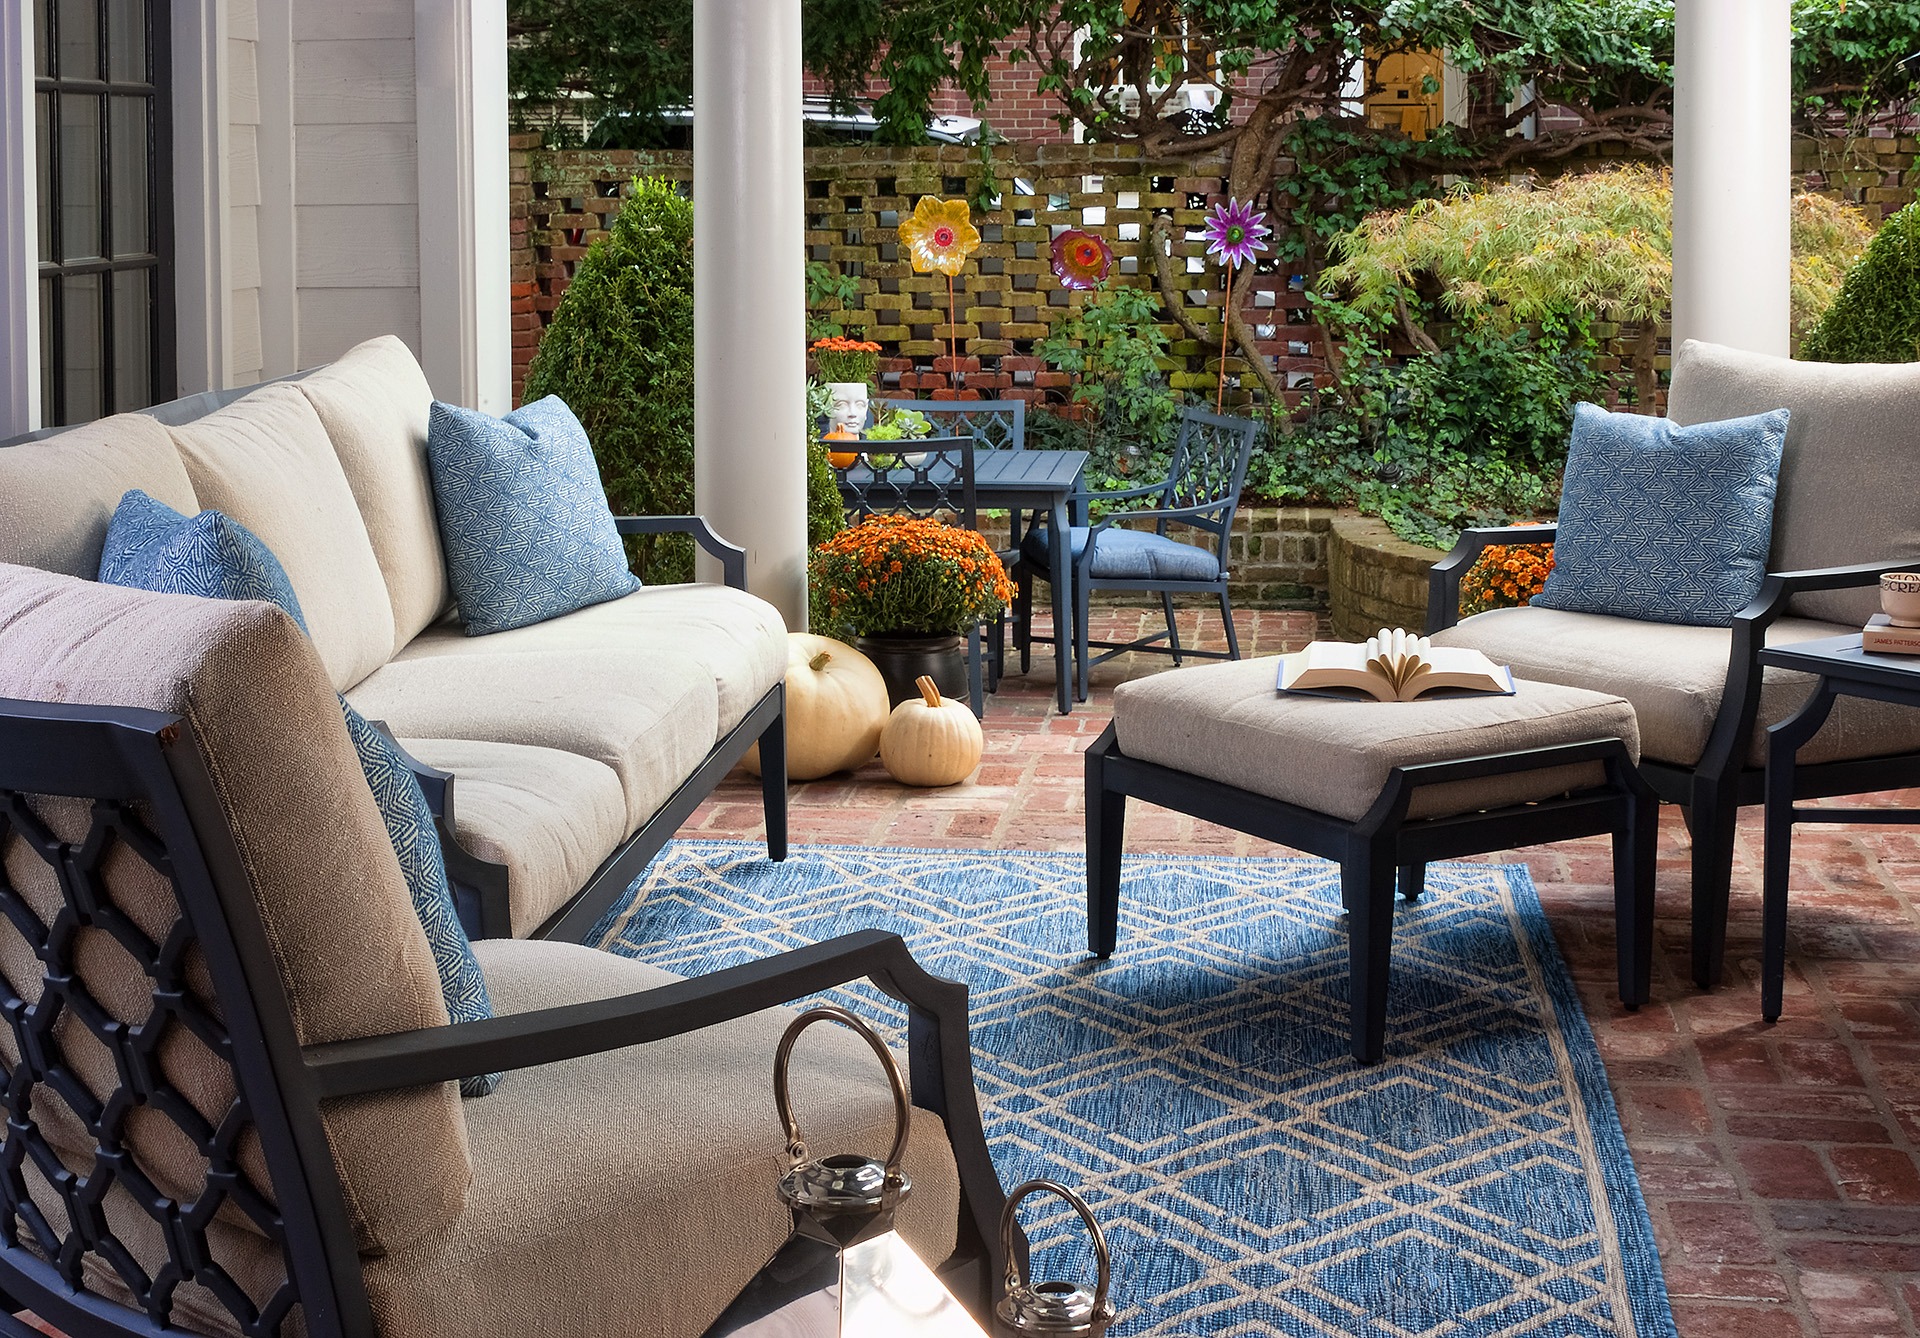 Let Your Indoor Design Style Inspire Your Outdoor Spaces